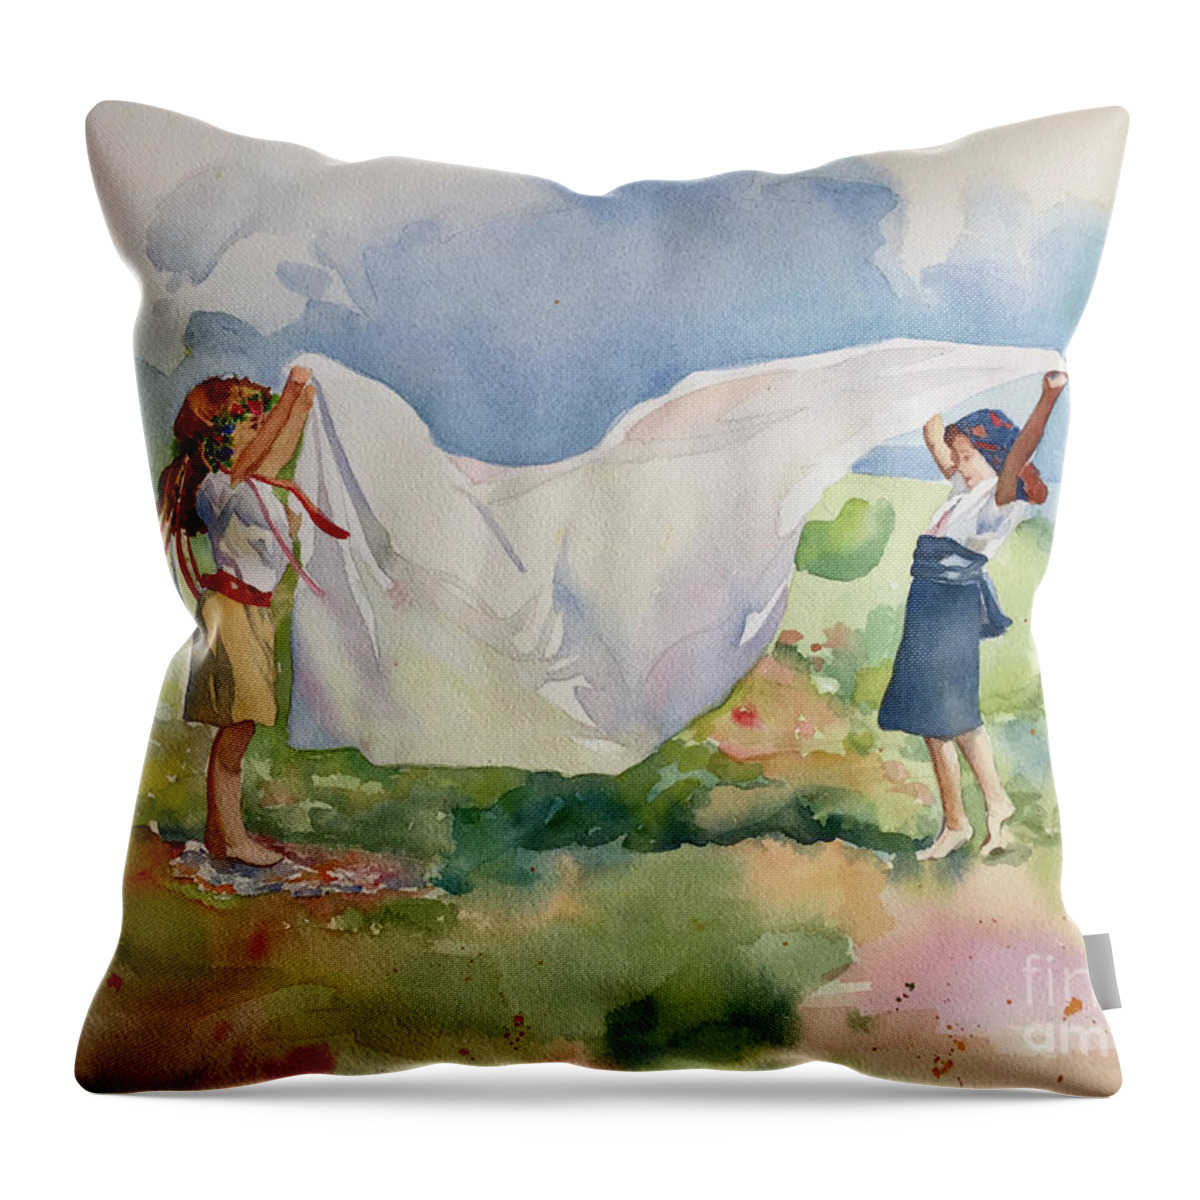 Girl Throw Pillow featuring the painting Dejeuner sur Herbe by Francoise Chauray